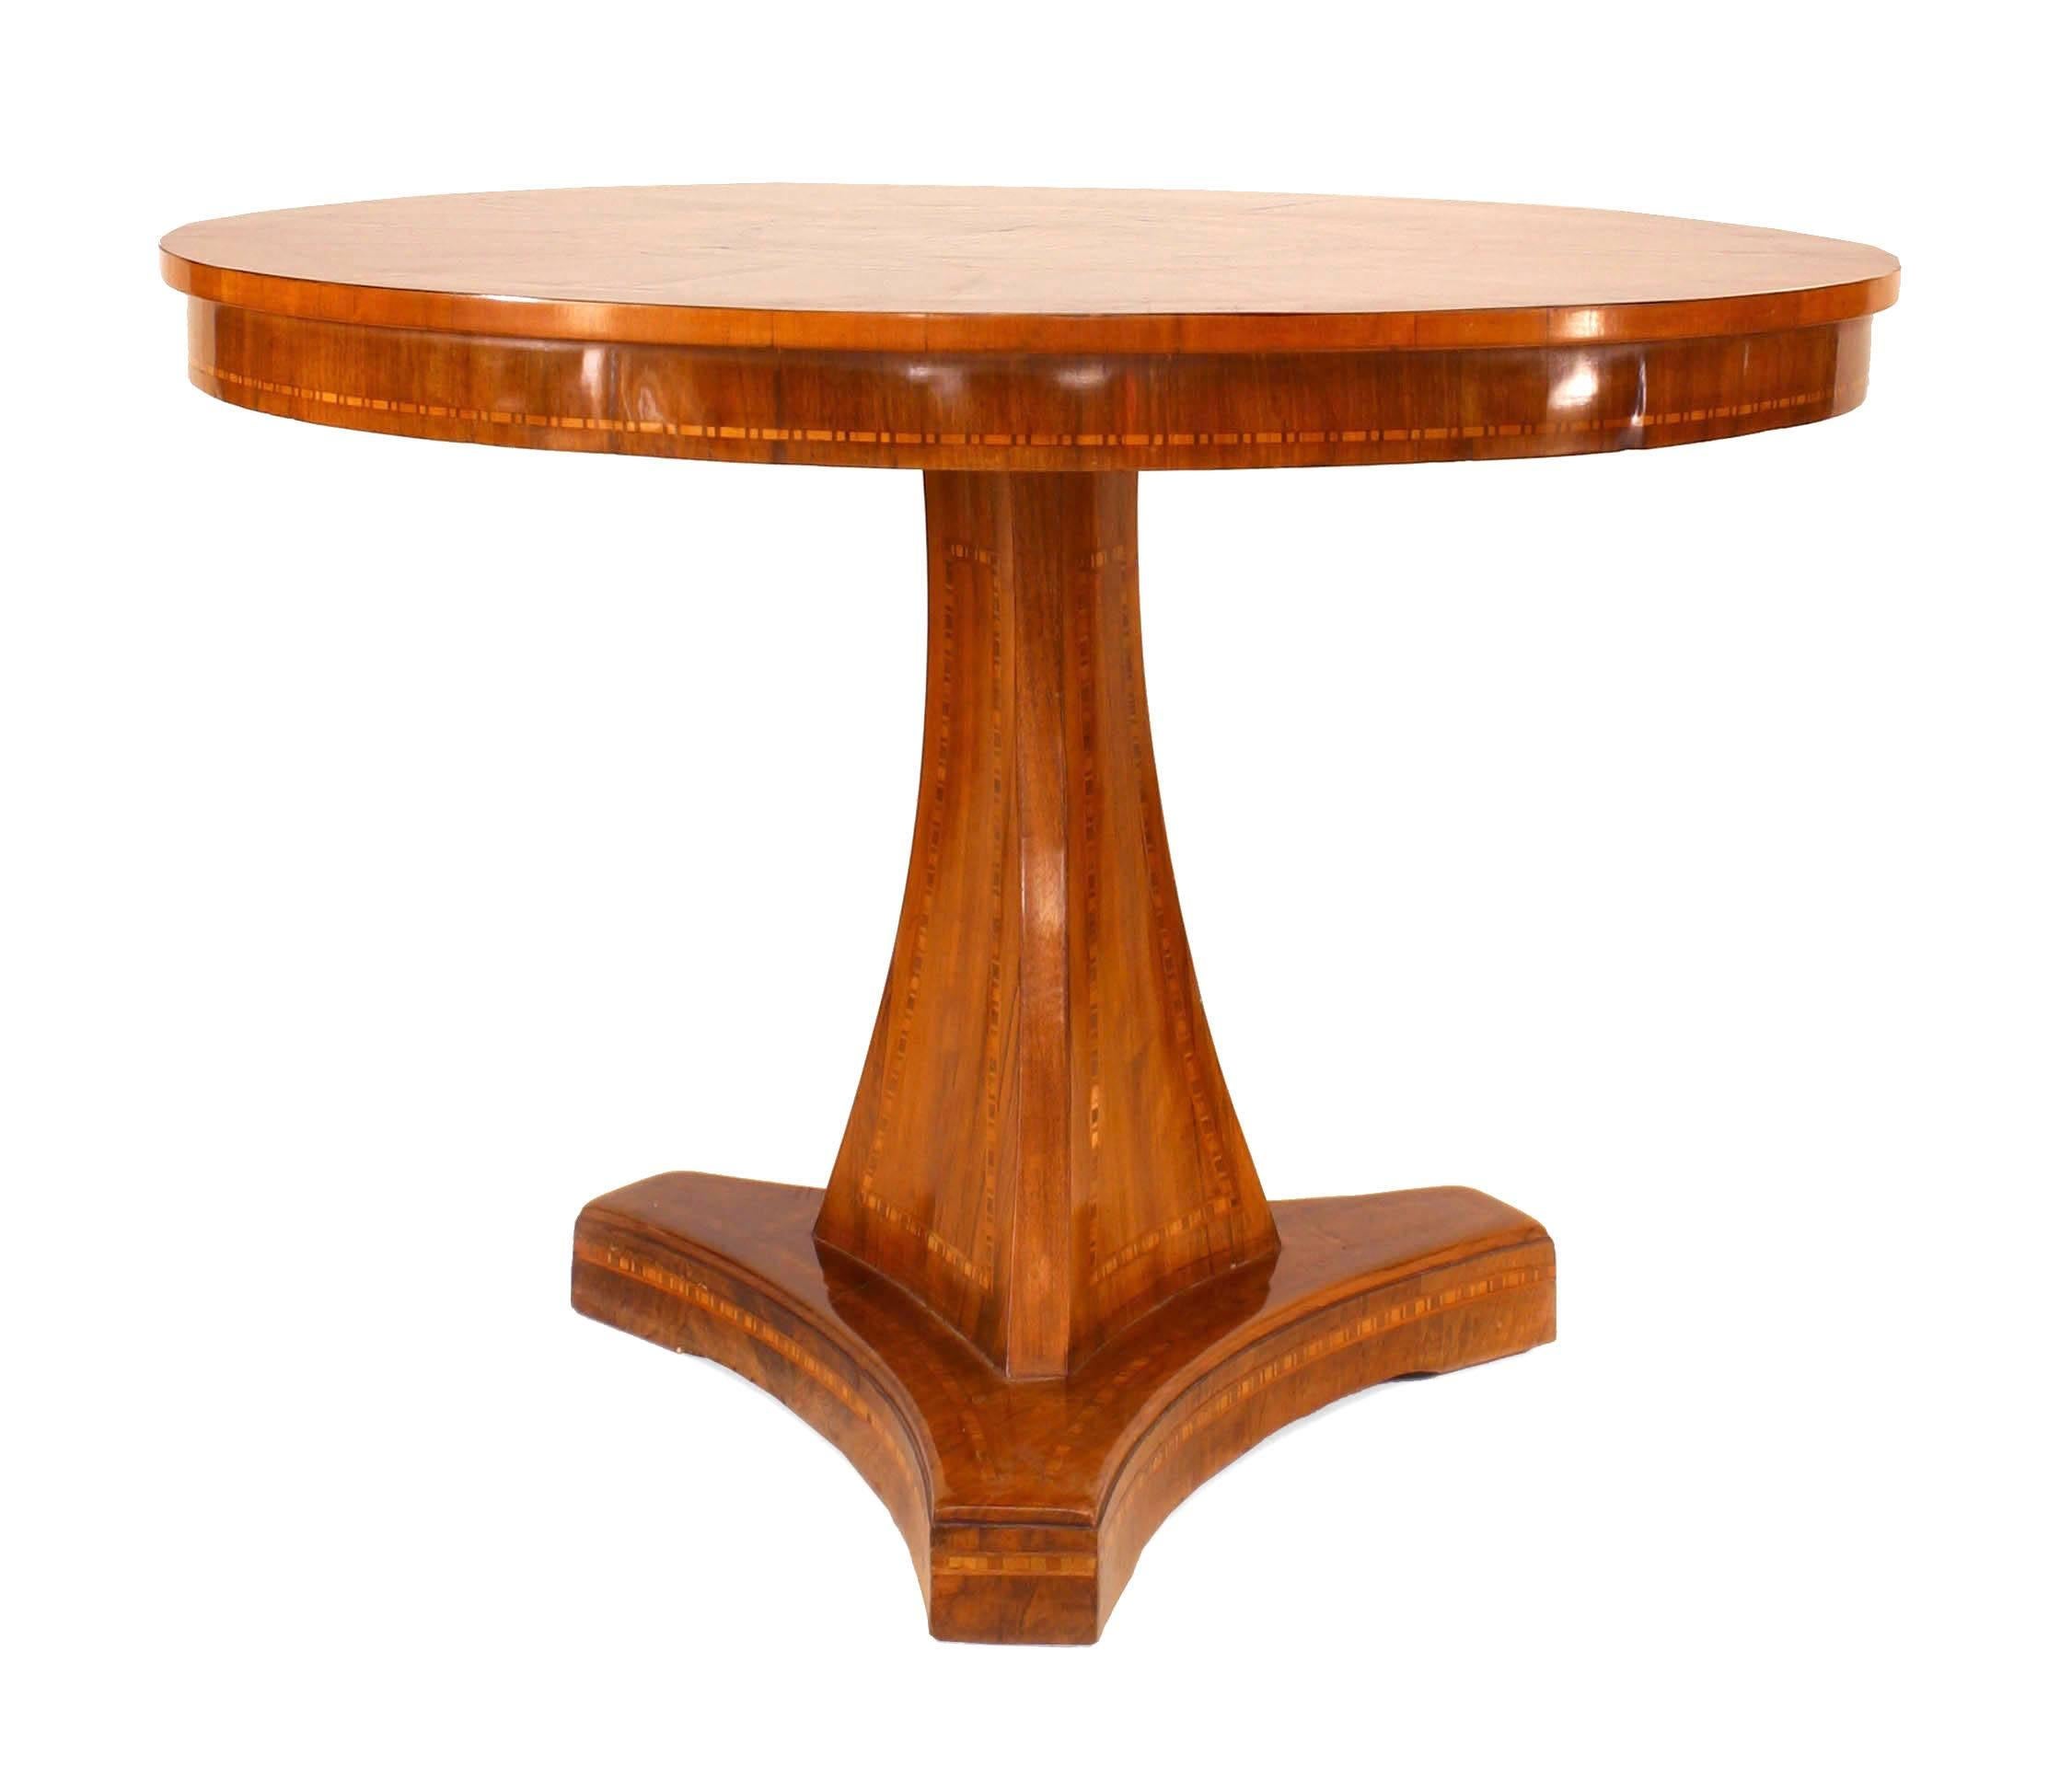 Continental Austrian (circa 1820) walnut round center table with an inlaid figure on horse centered in inlaid rings and supported on a triangular pedestal and base.
